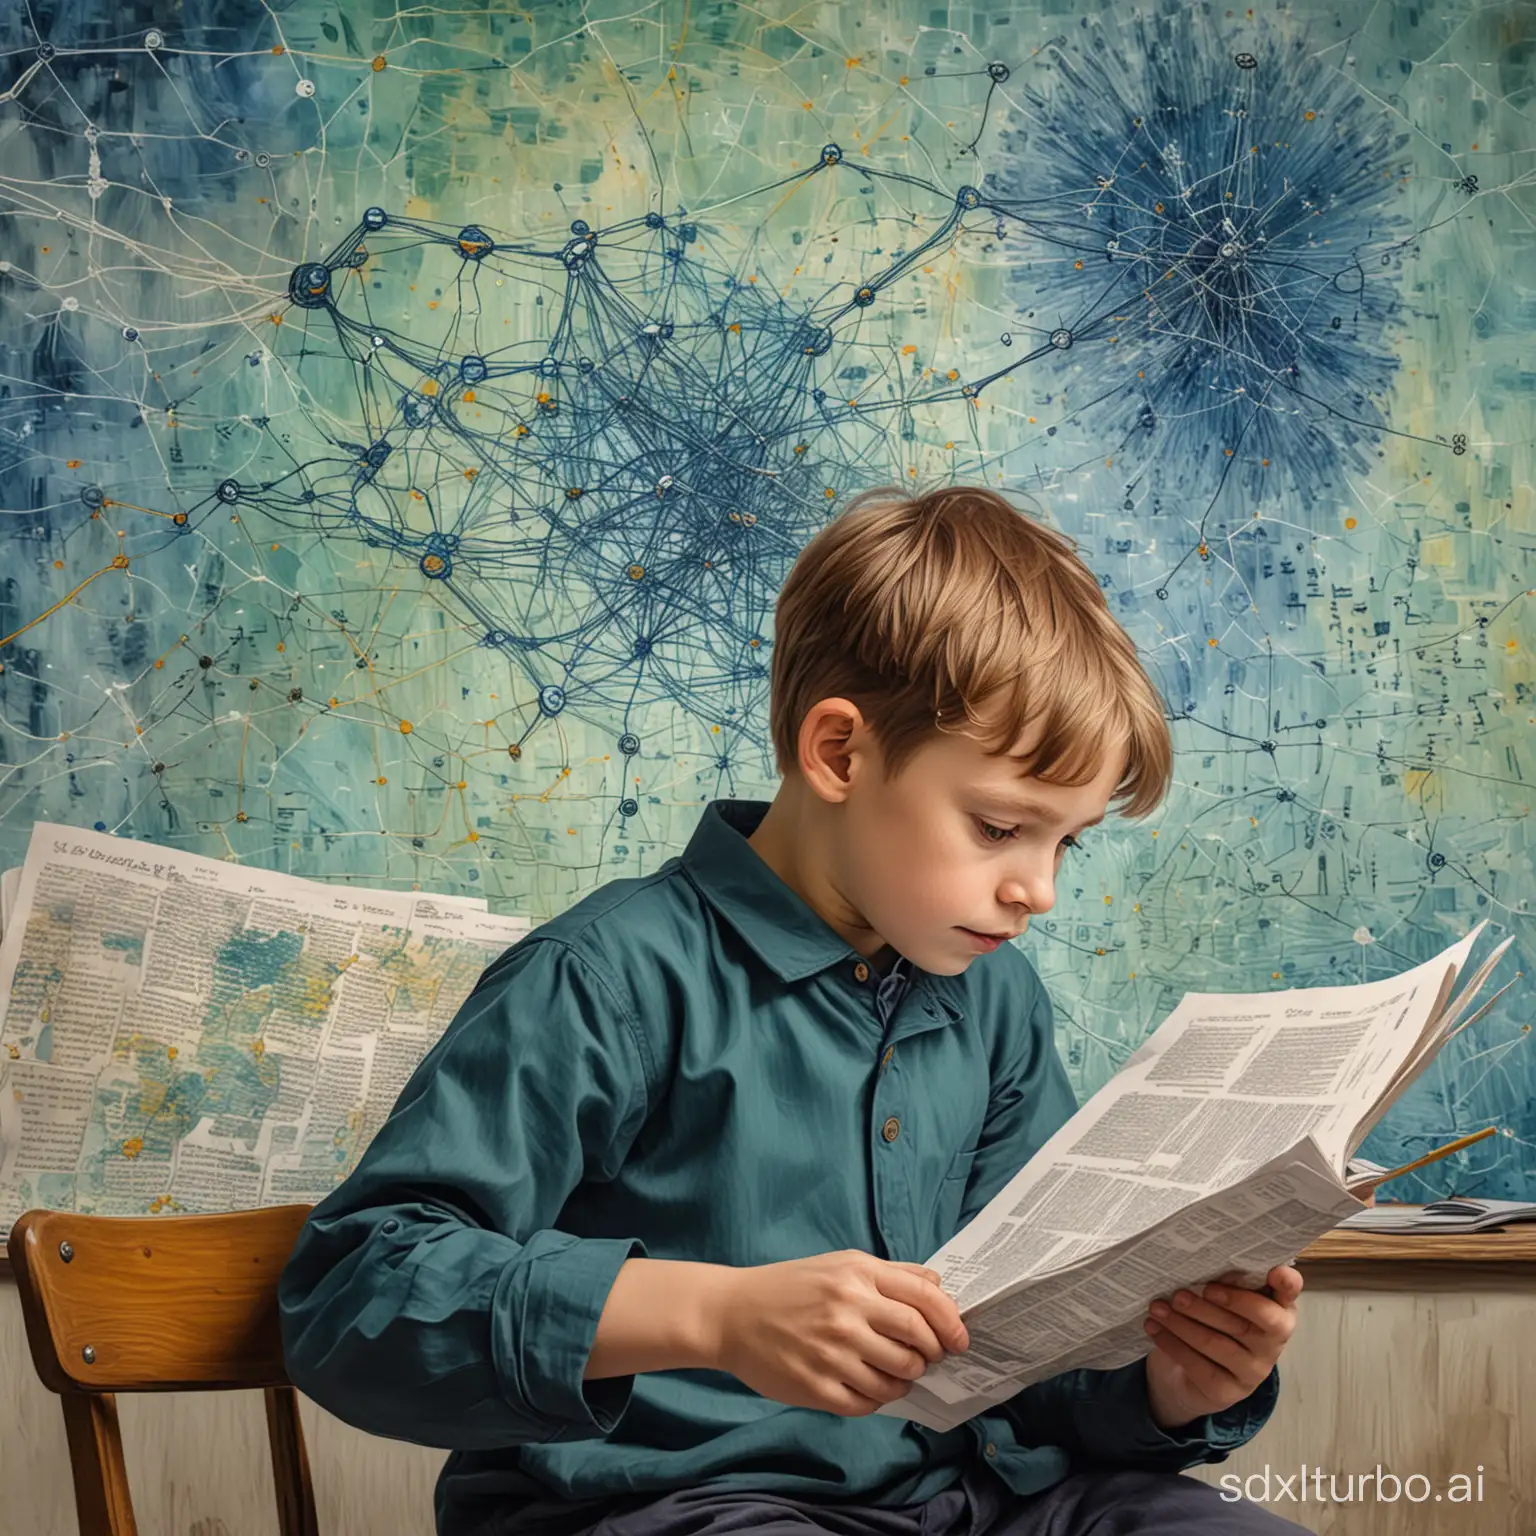 An water paint painting of a kid reading a scientific paper with neural networks in the background in van gogh style